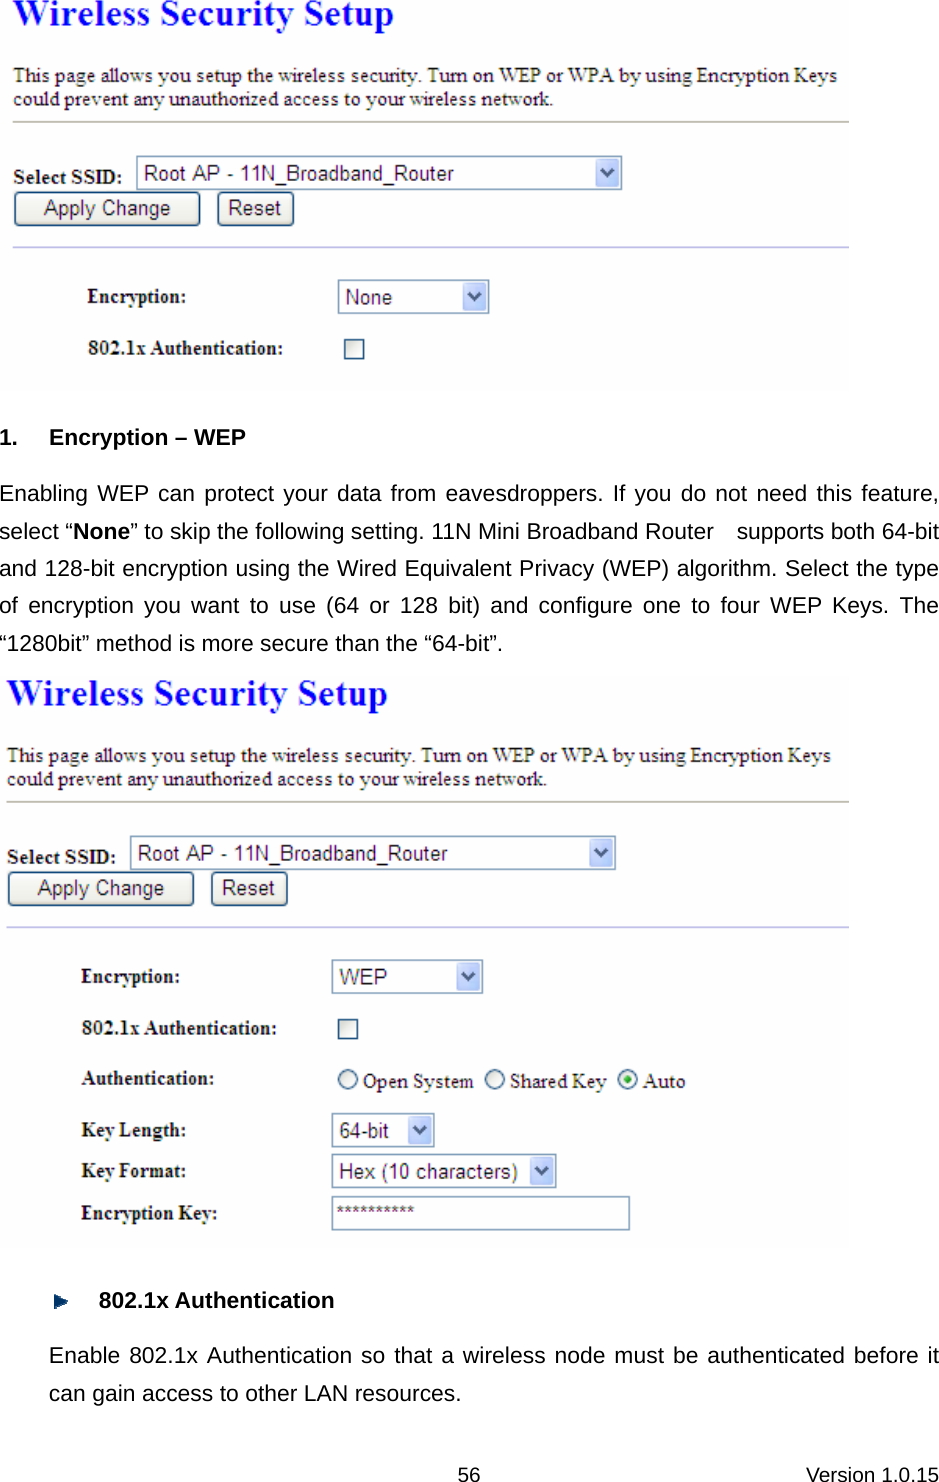 Version 1.0.15 56 1.  Encryption – WEP Enabling WEP can protect your data from eavesdroppers. If you do not need this feature, select “None” to skip the following setting. 11N Mini Broadband Router    supports both 64-bit and 128-bit encryption using the Wired Equivalent Privacy (WEP) algorithm. Select the type of encryption you want to use (64 or 128 bit) and configure one to four WEP Keys. The “1280bit” method is more secure than the “64-bit”.       802.1x Authentication   Enable 802.1x Authentication so that a wireless node must be authenticated before it can gain access to other LAN resources.   